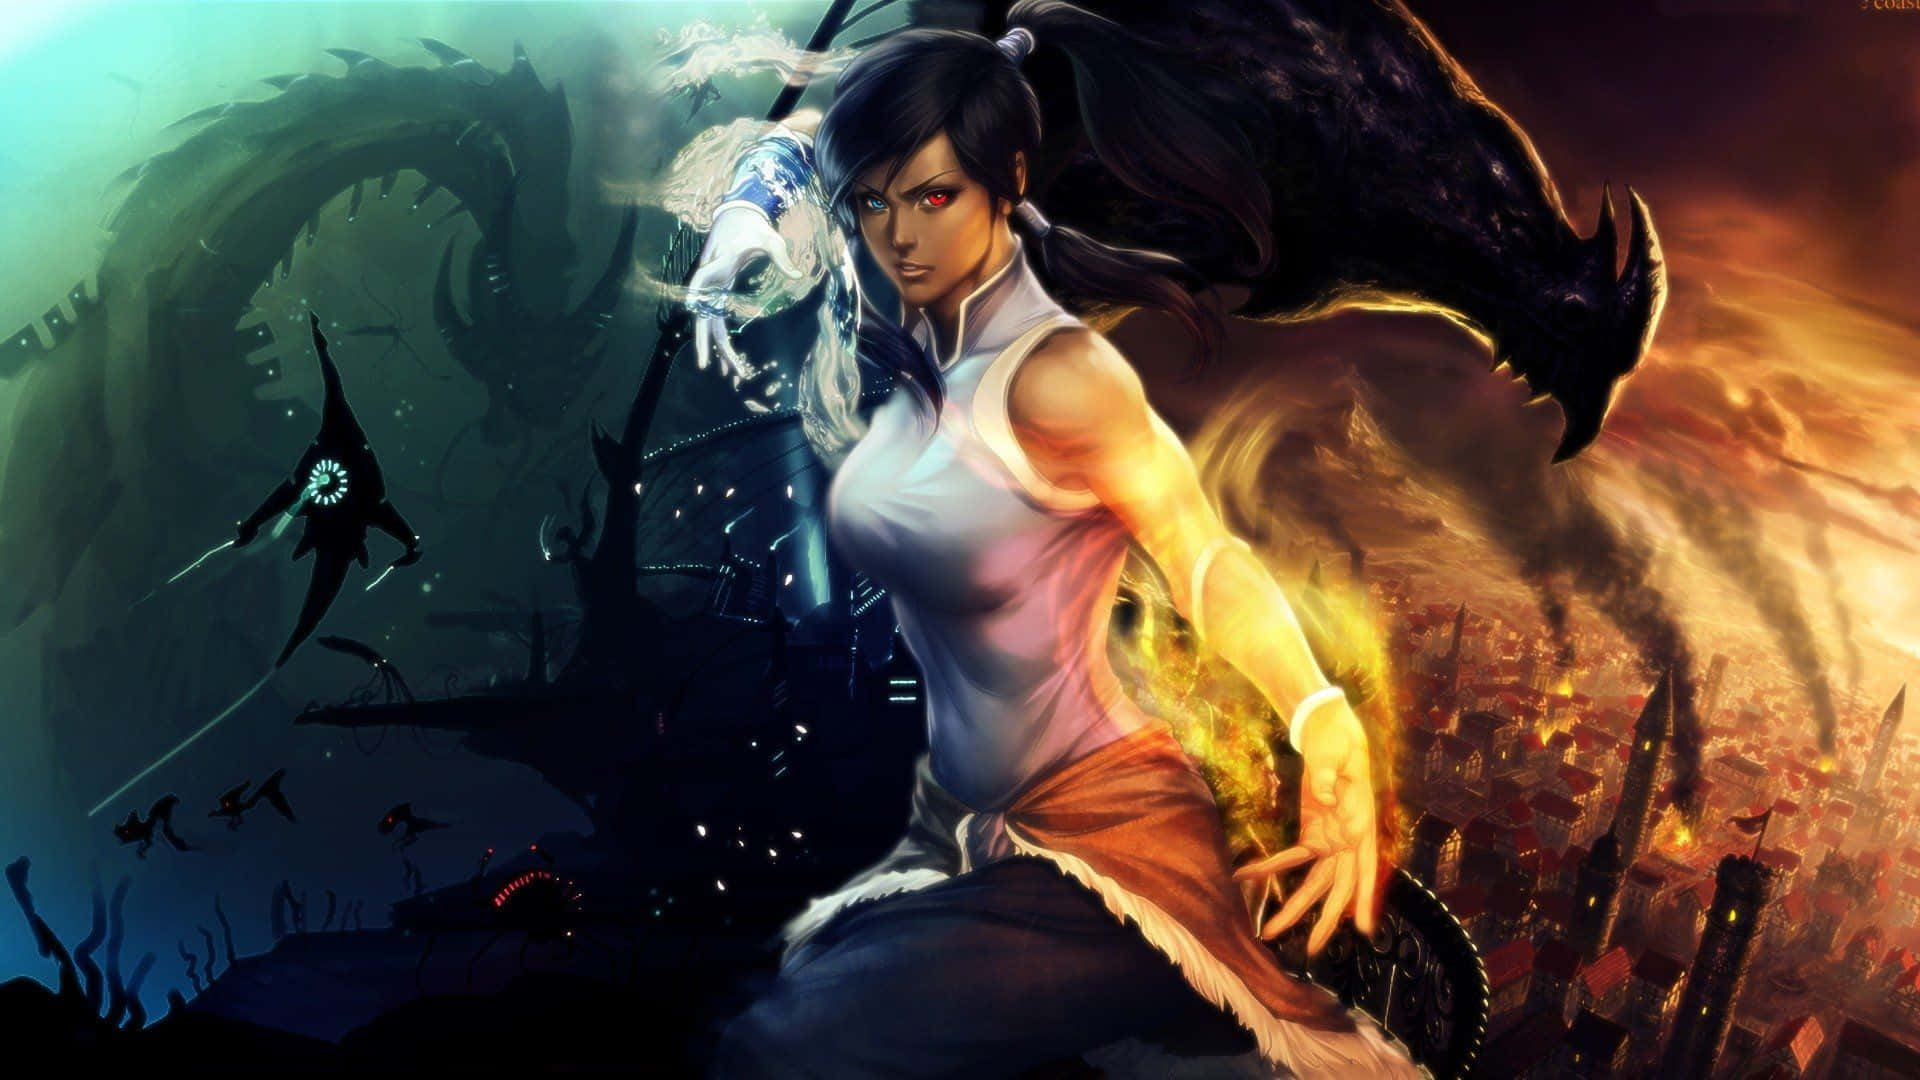 Korra And Her Airbending Team Take On An Epic Battle.